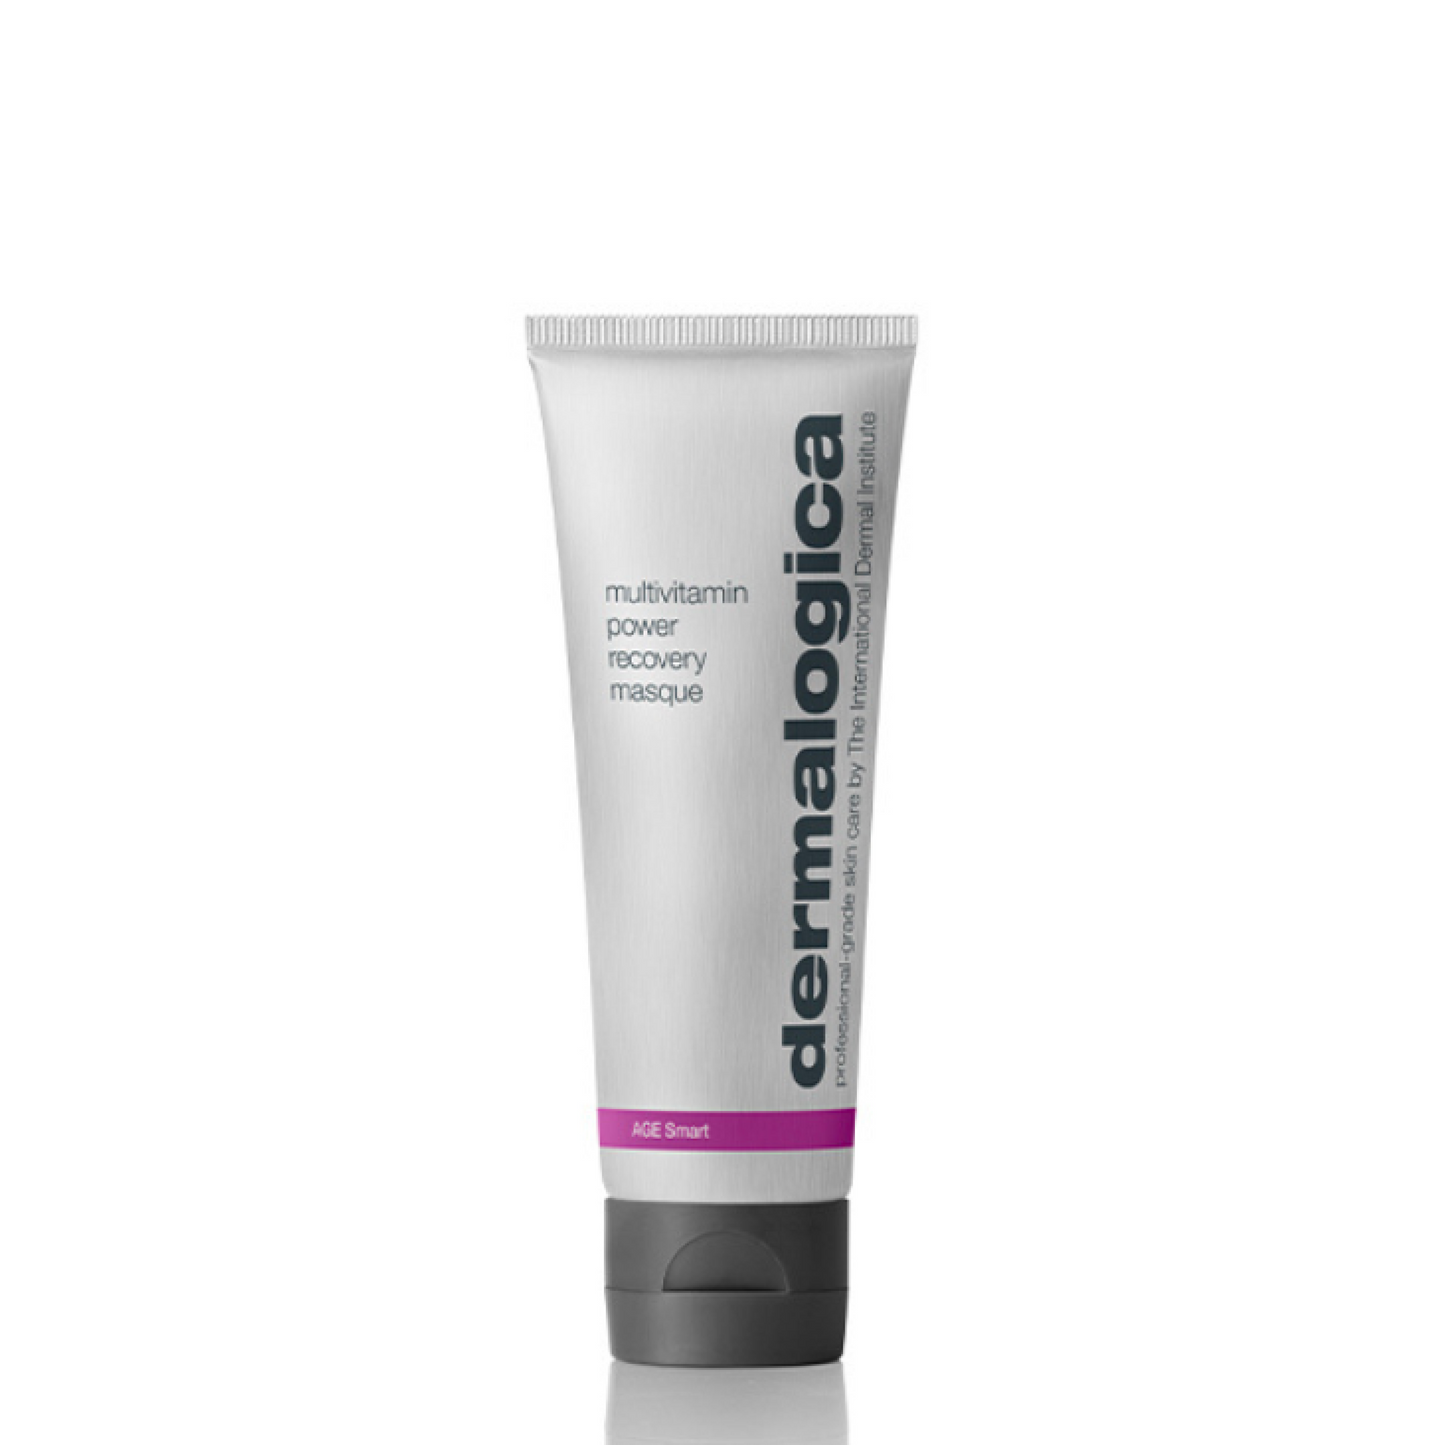 multivitamin power recovery masque